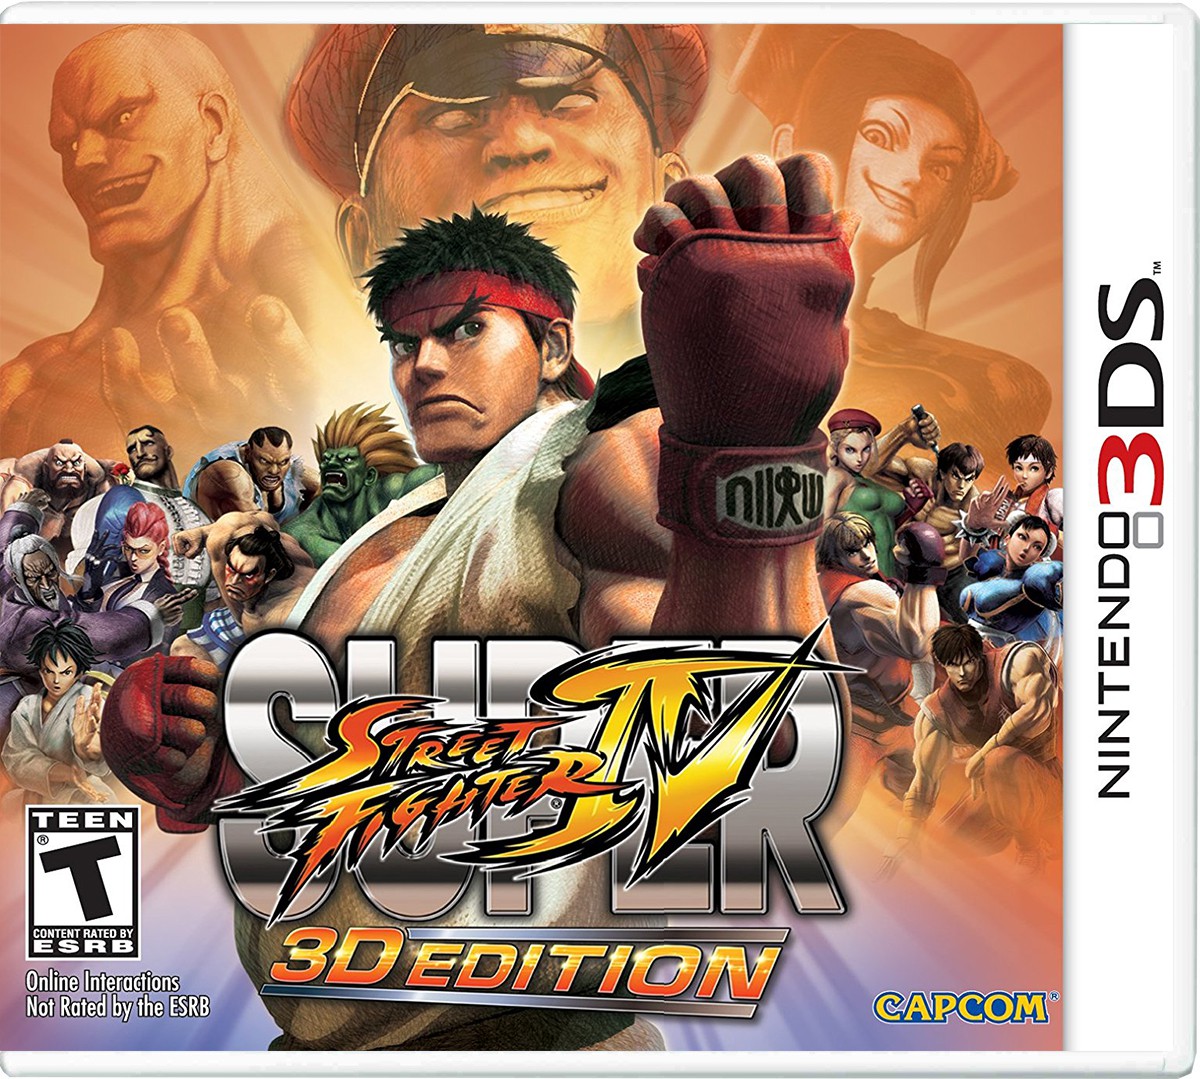 Super Street Fighters IV: 3D Edition